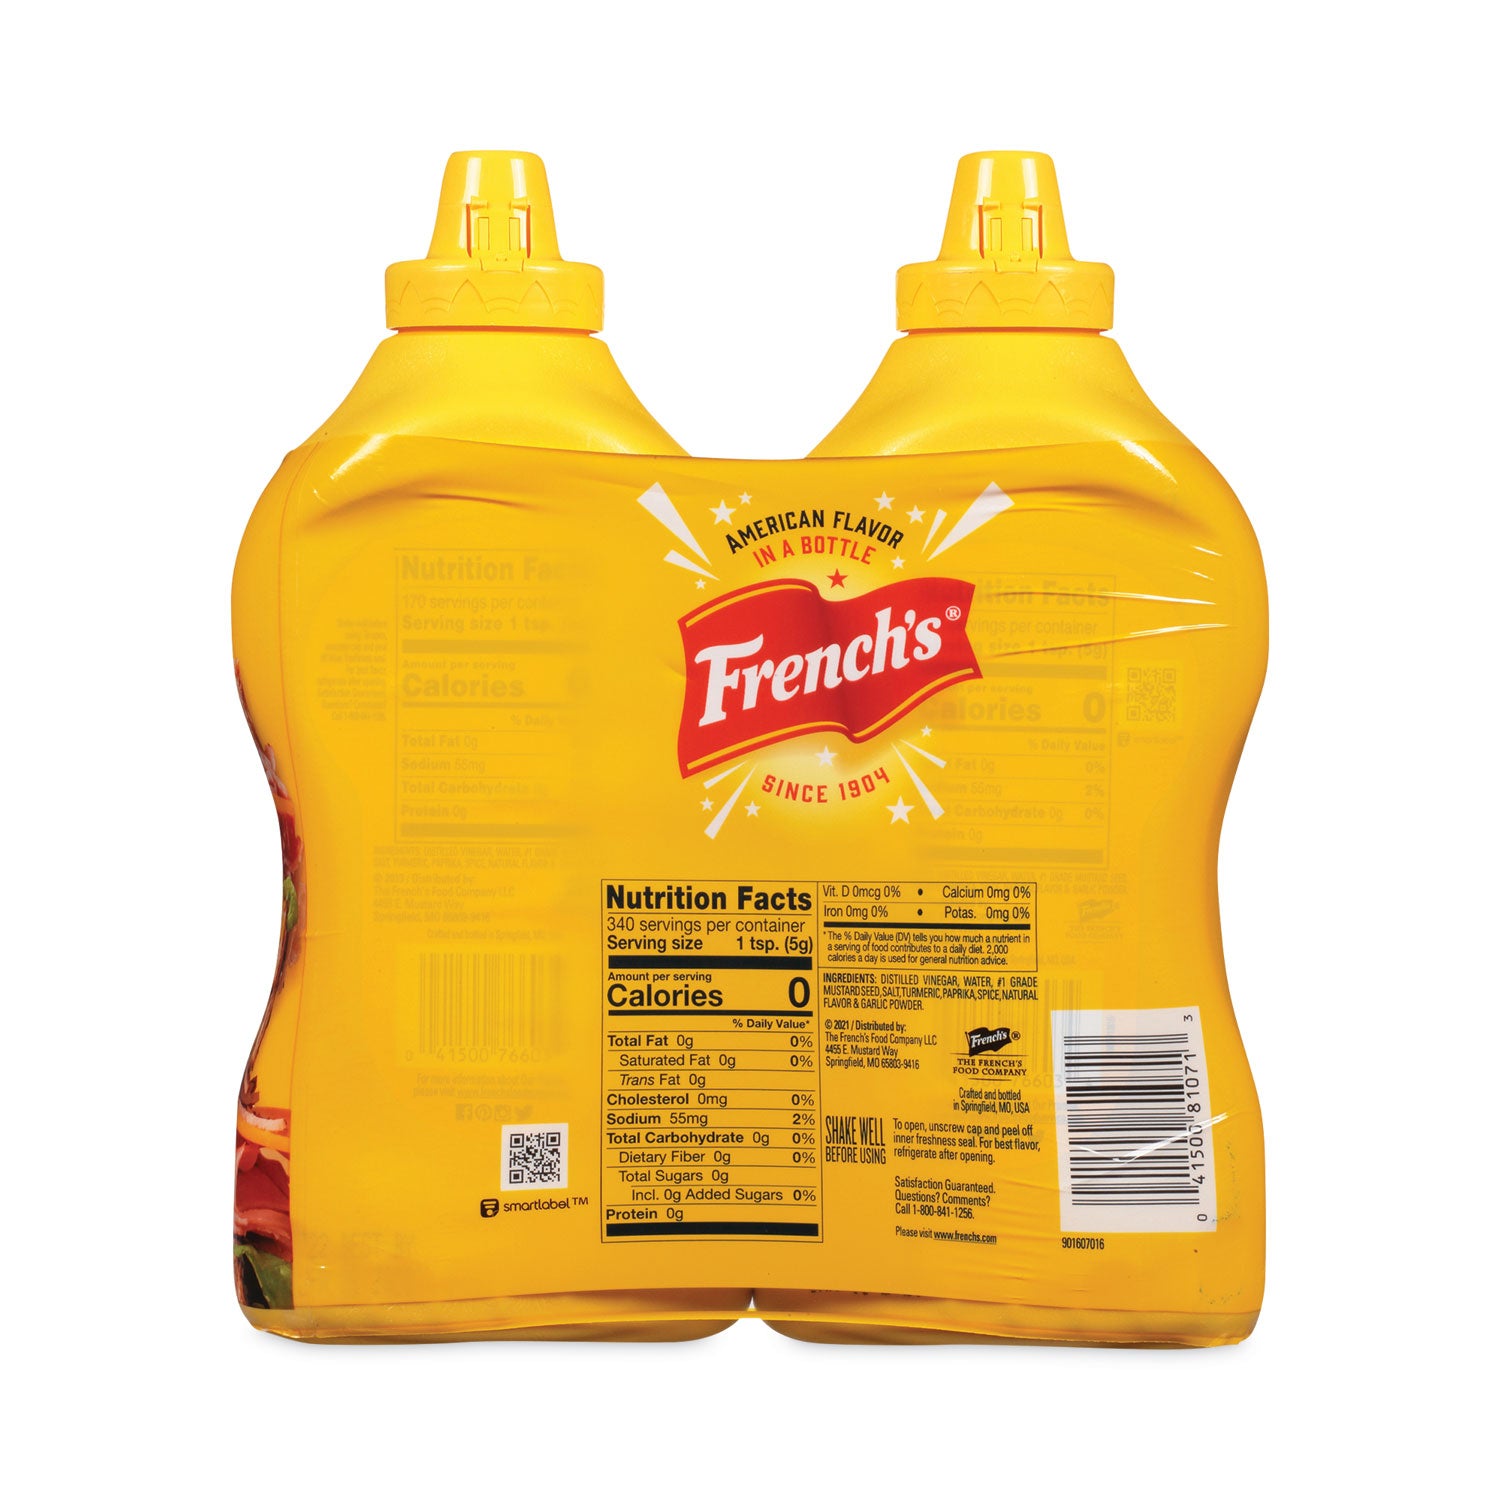 classic-yellow-mustard-30-oz-bottle-2-pack-ships-in-1-3-business-days_grr22000465 - 4